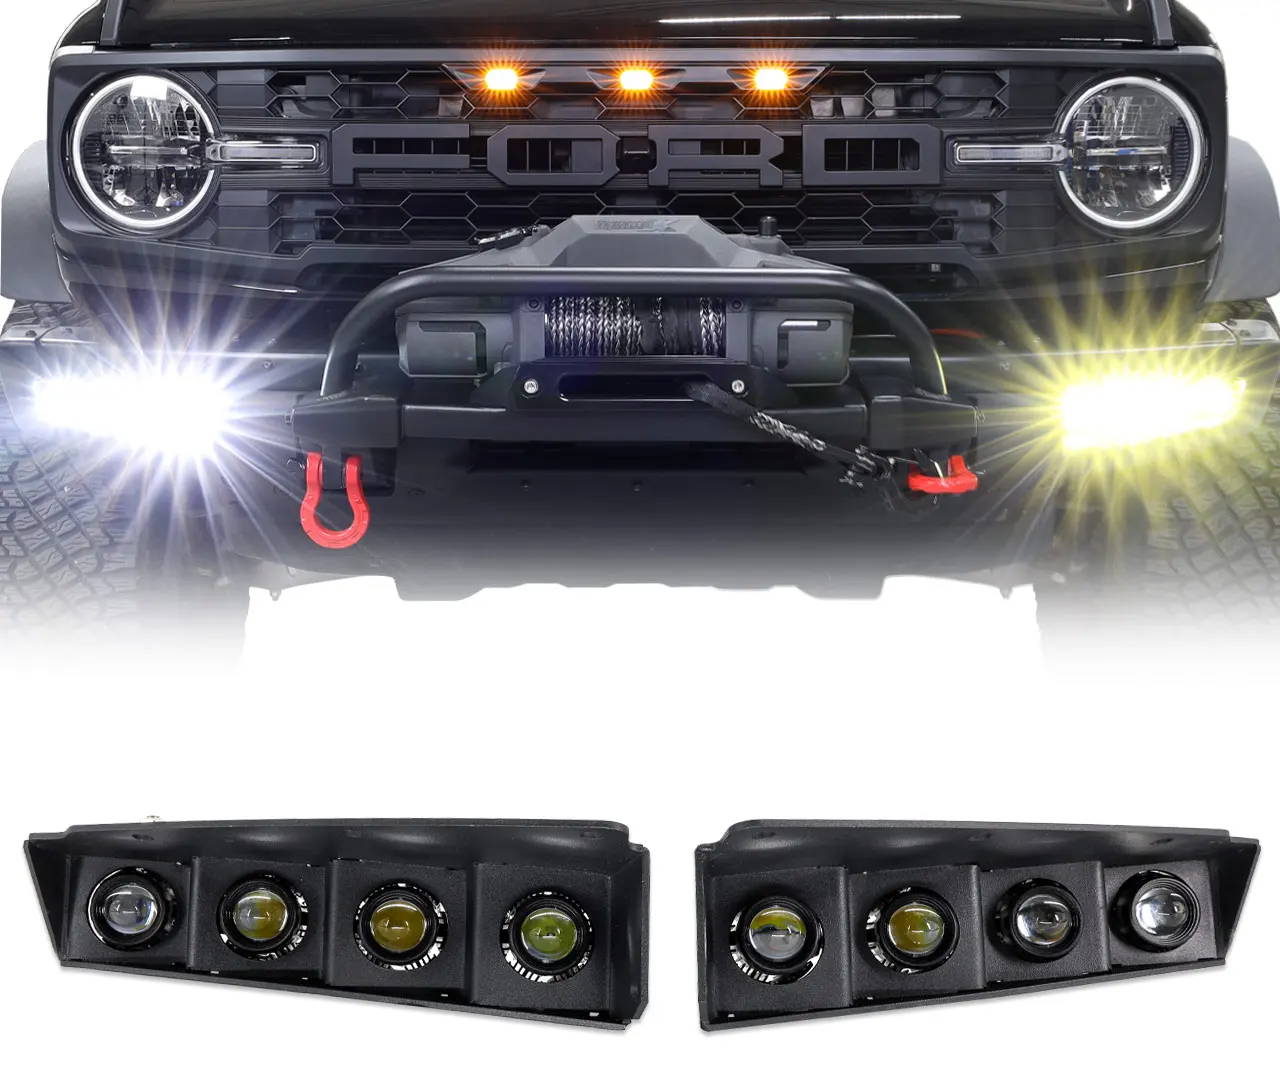 IAG I-Line 4 Lamp Fog Light Kit for use with Modular Bumper & 6 Way Aux Switch Panel fits 2021+ Ford Bronco